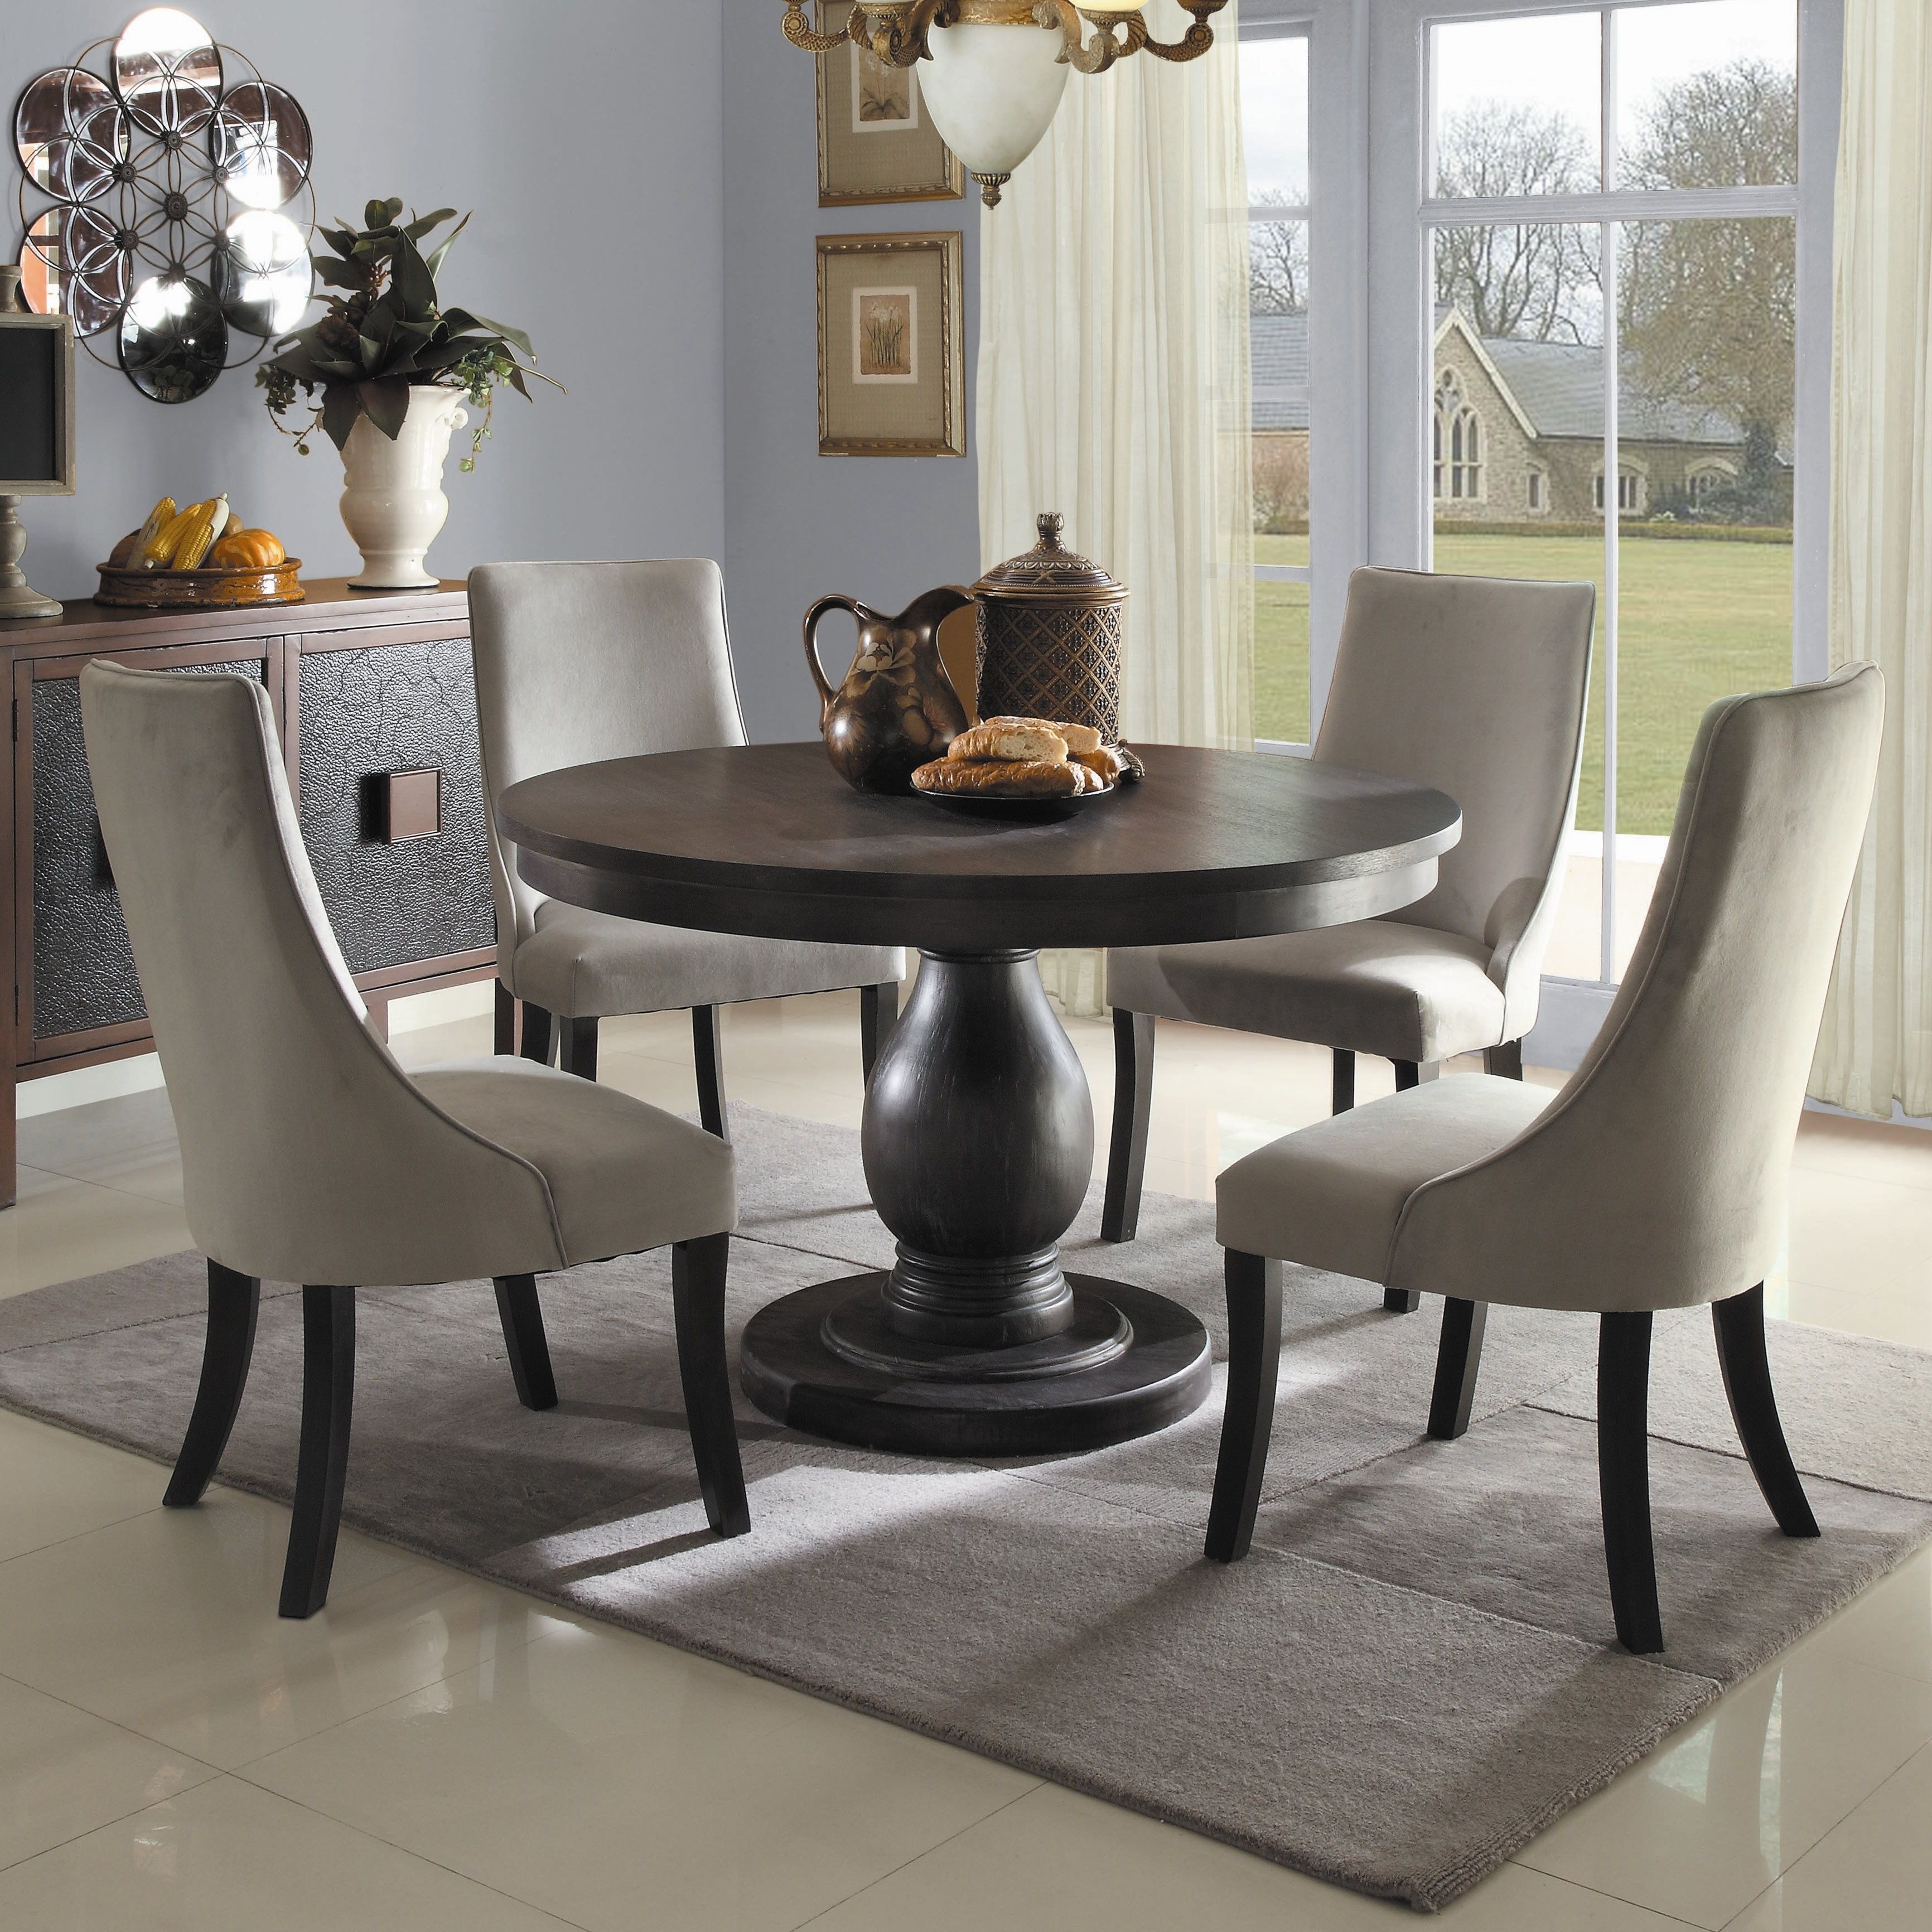 Barrington 5 Piece Dining Set Intended For Most Recent 5 Piece Dining Sets (View 14 of 20)